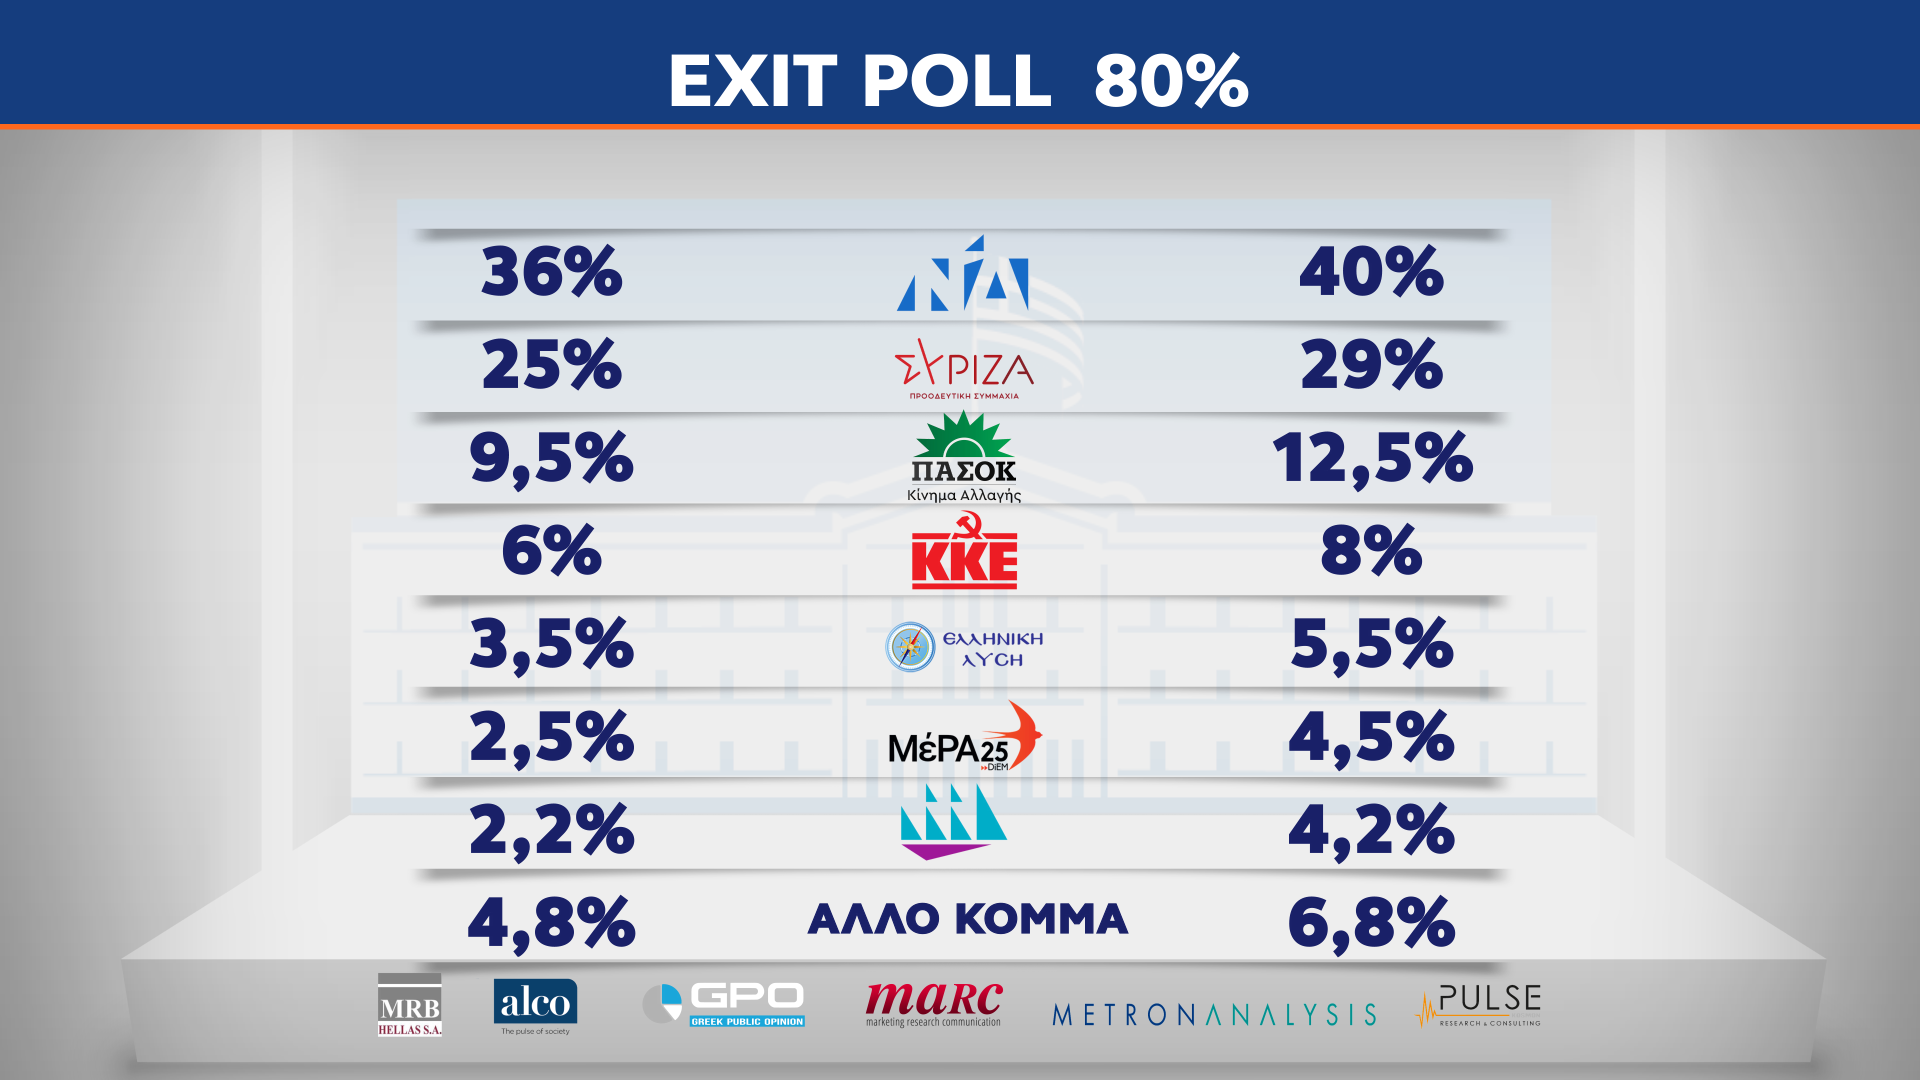 EXIT POLL 01